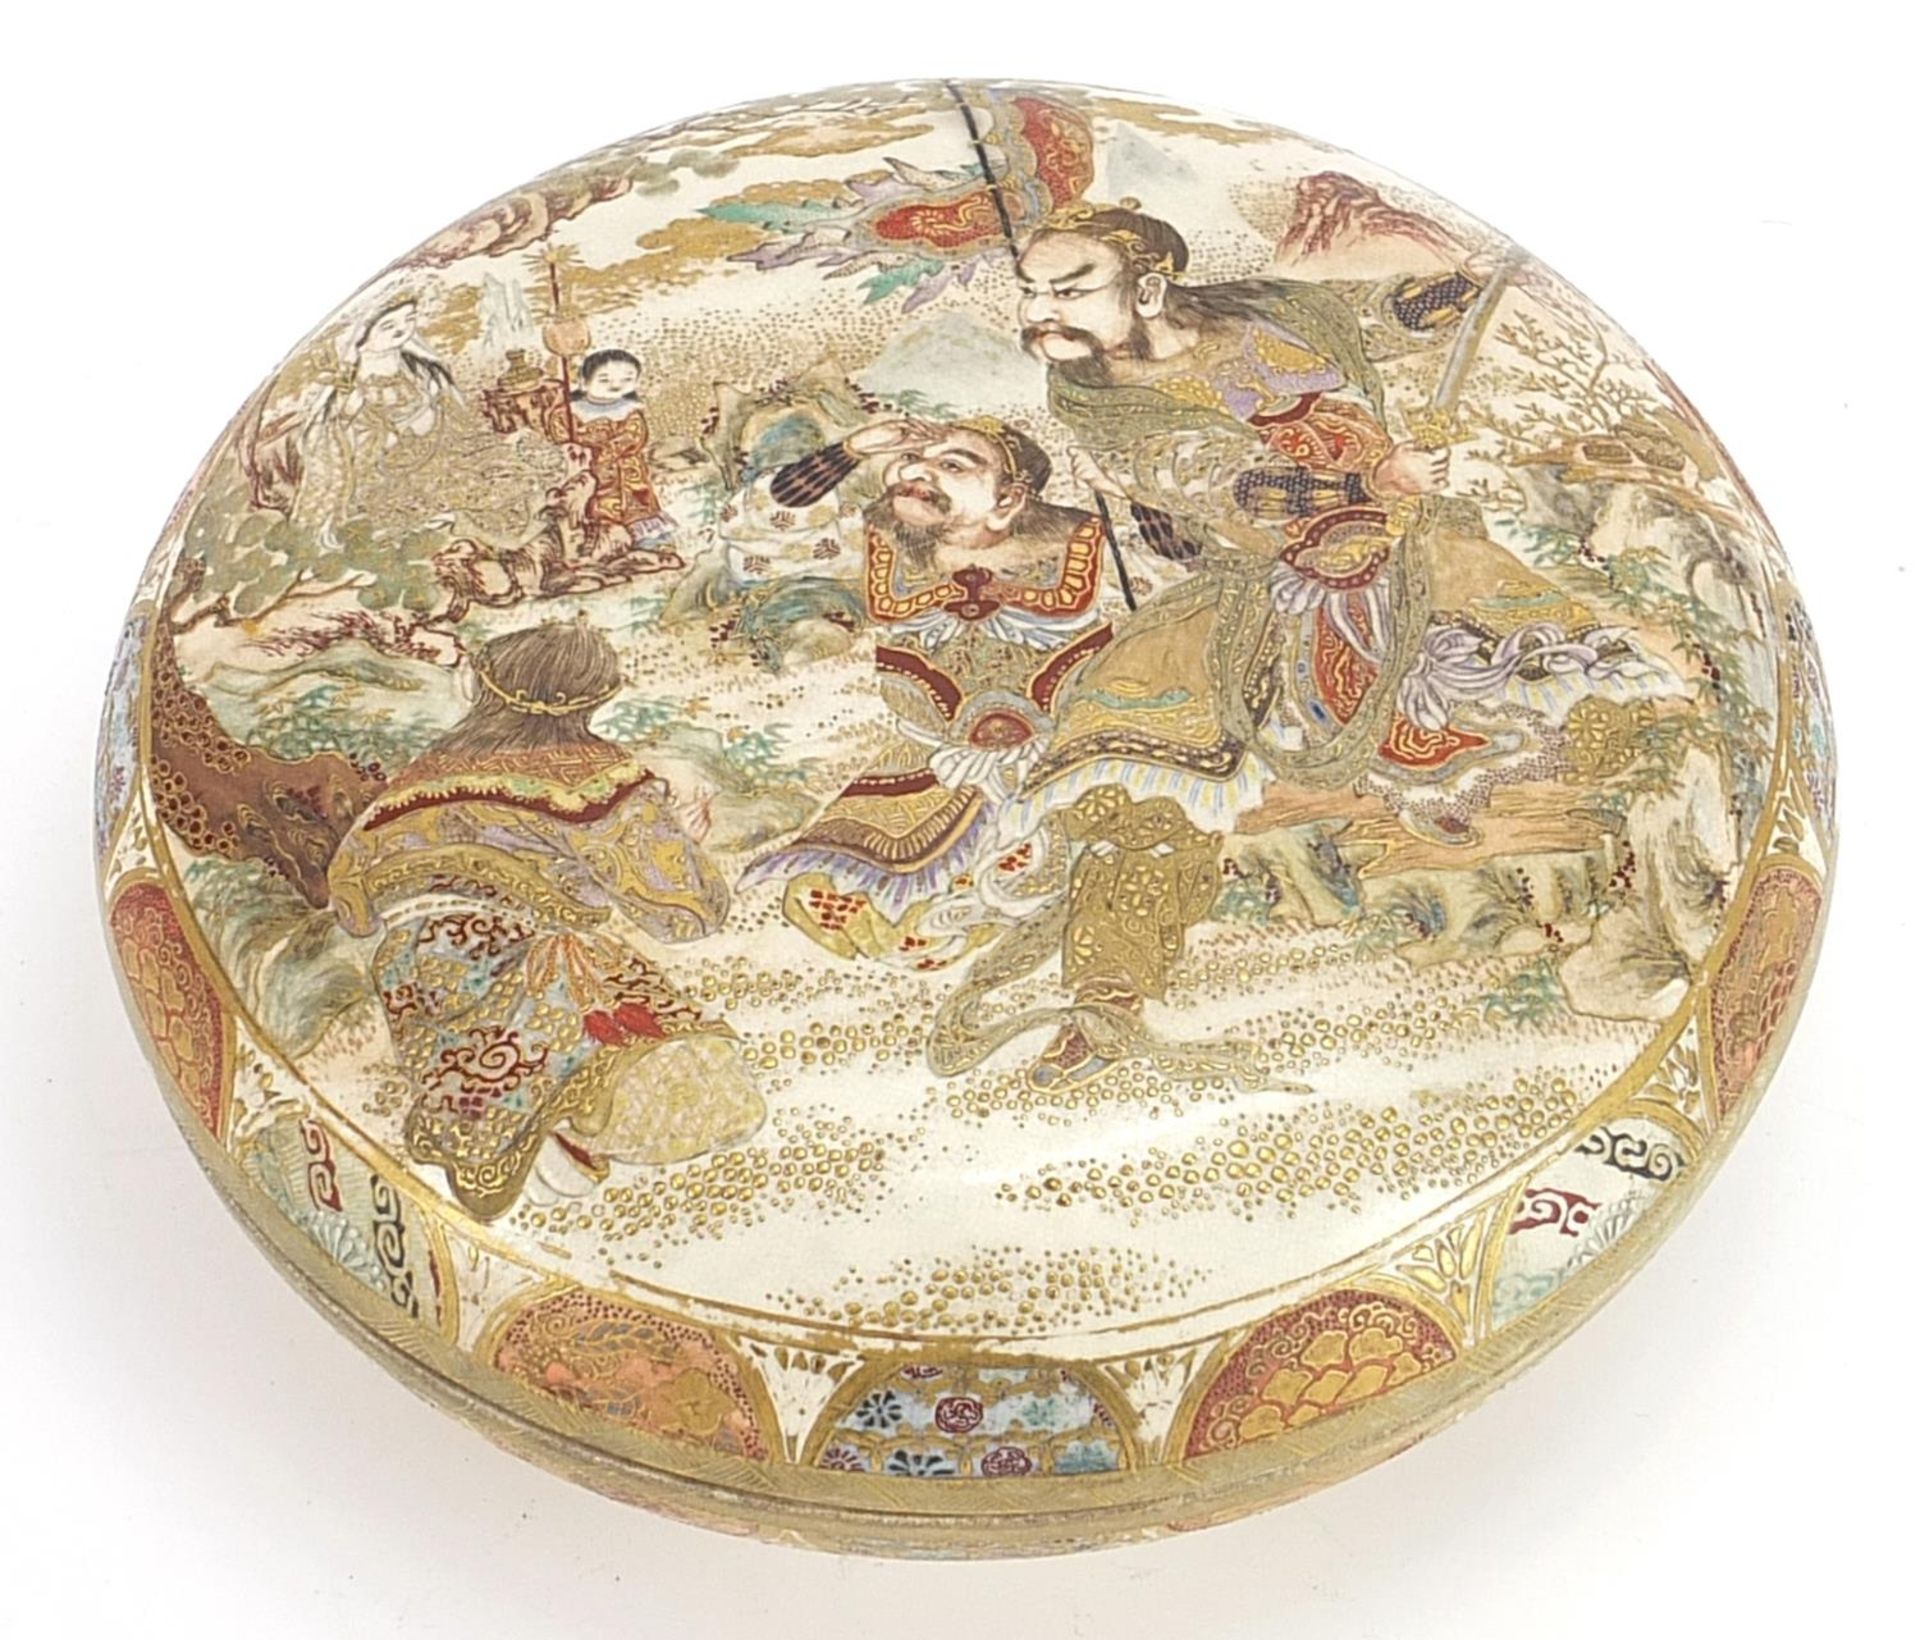 Japanese Satsuma pottery box and cover hand painted with figures and warriors, 17cm in diameter